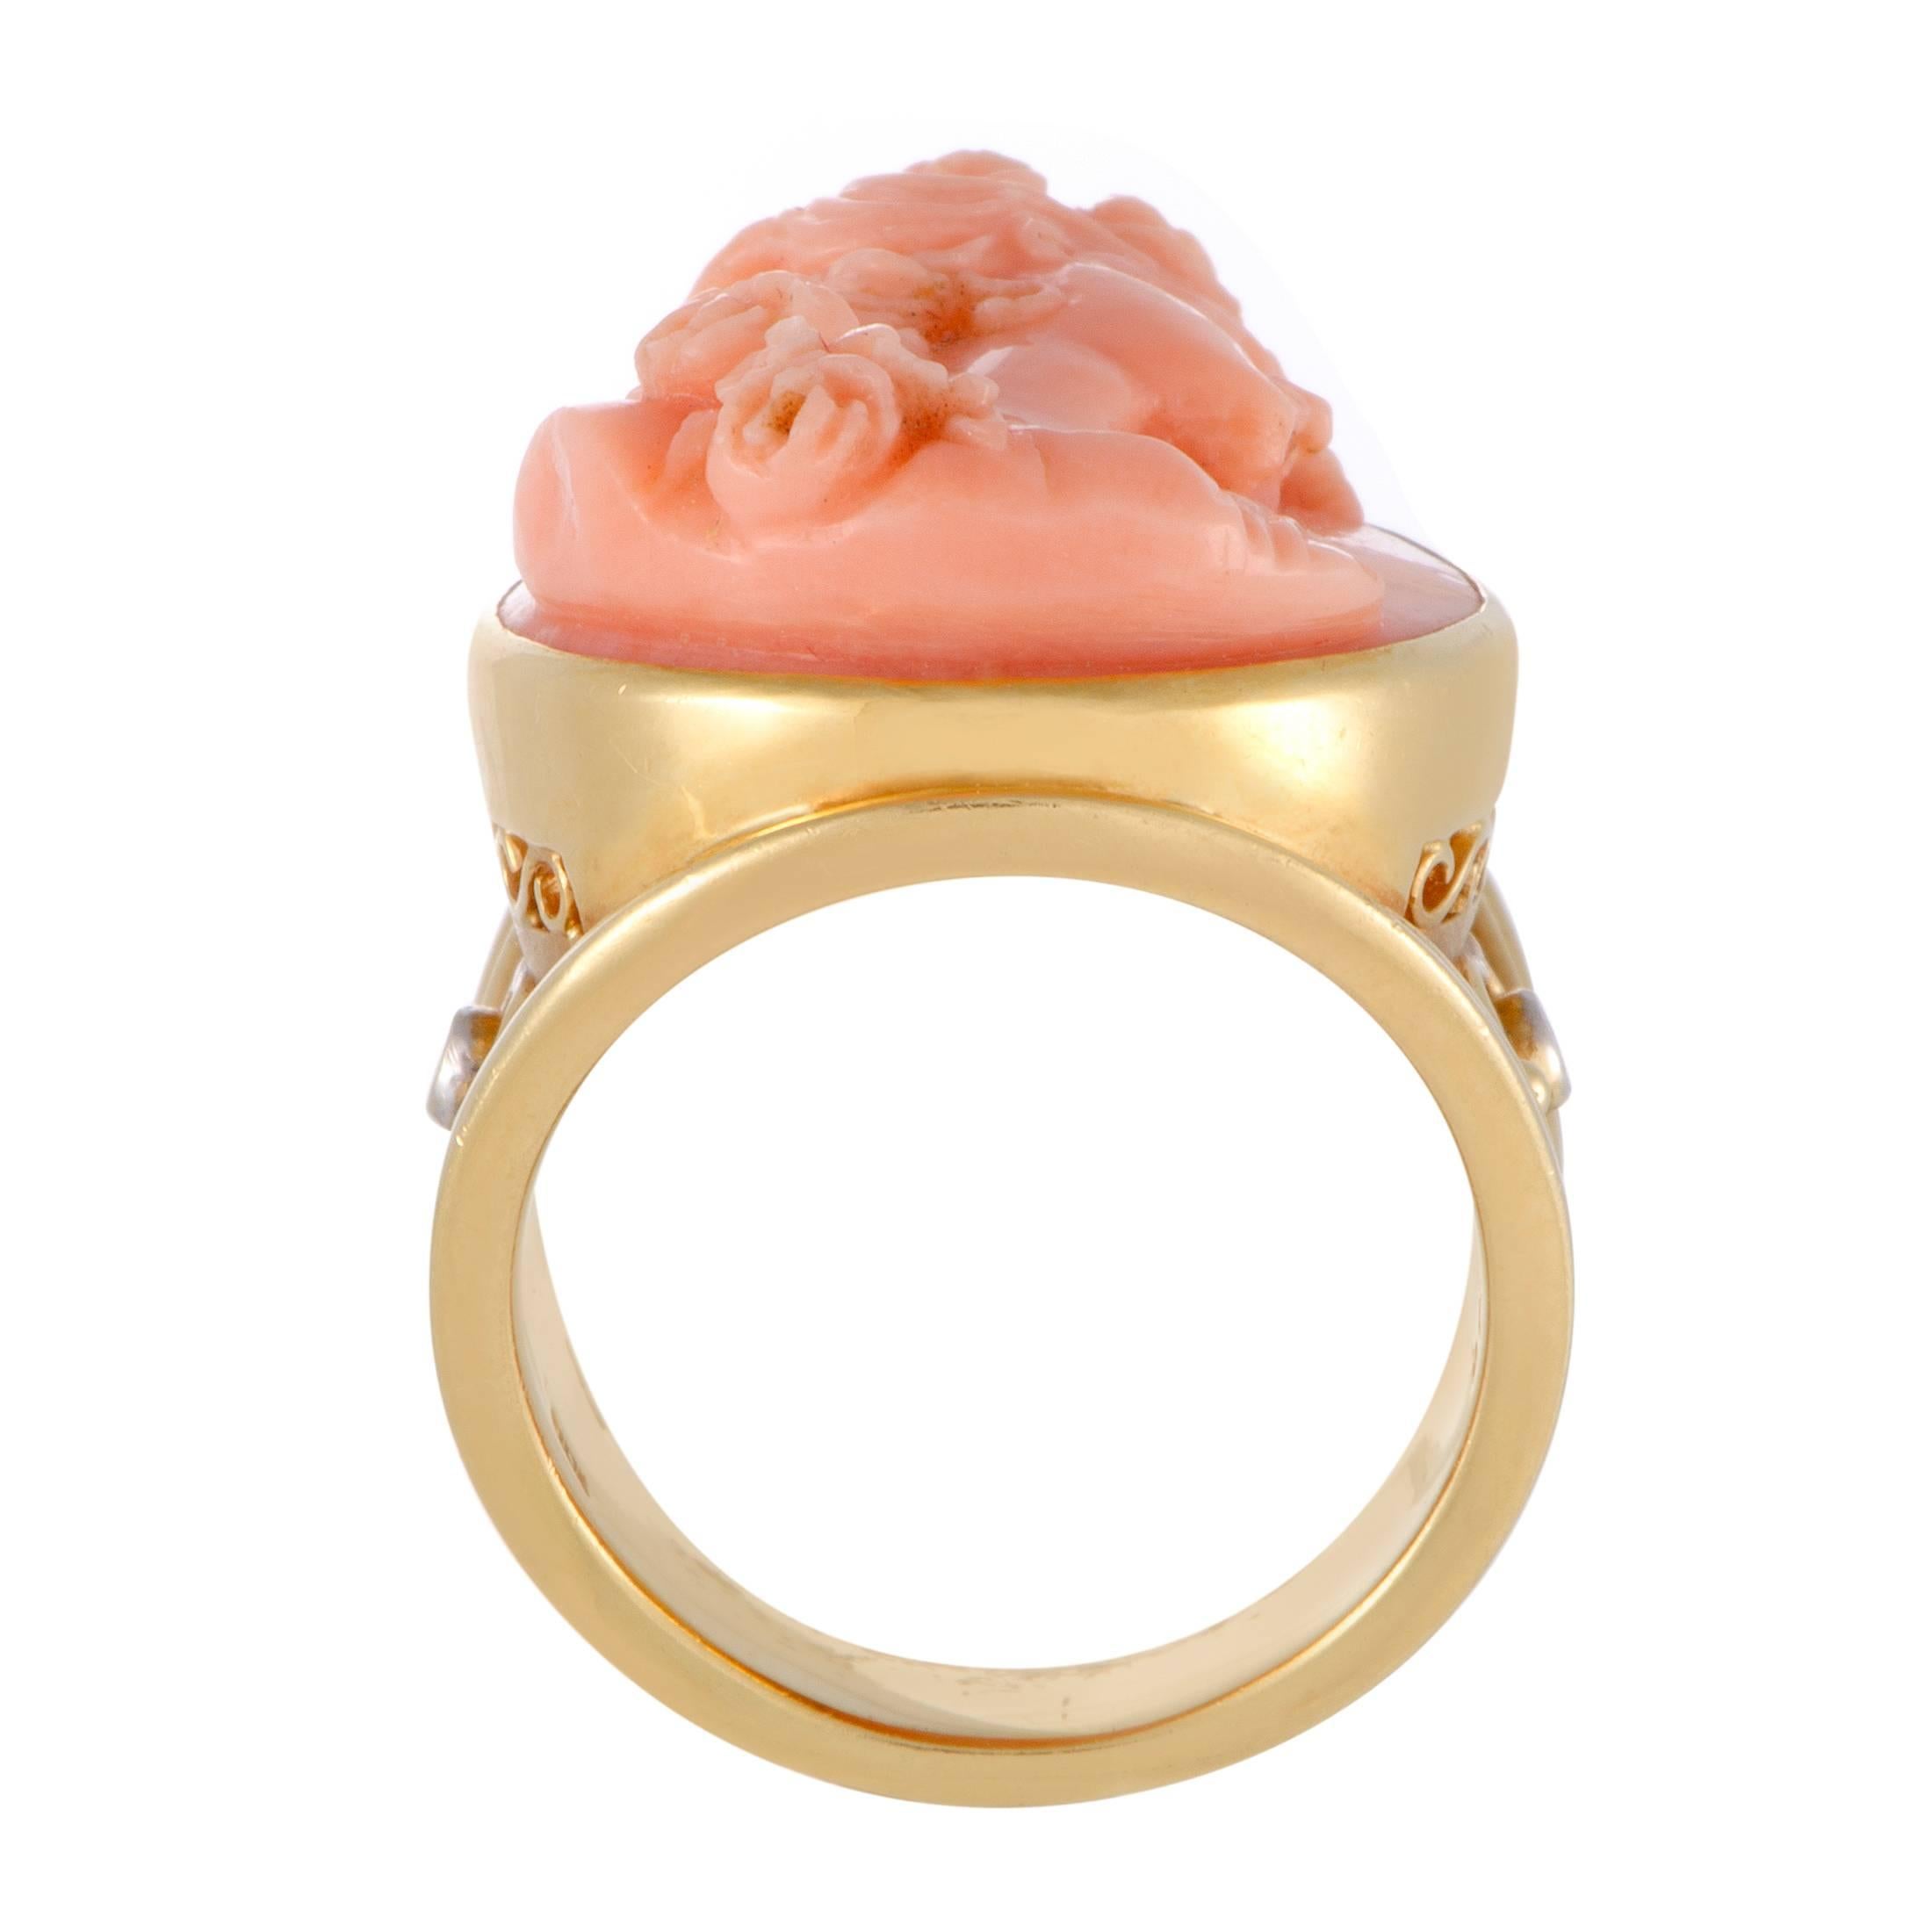 The compelling antique spirit of this magnificent ring is produced by the amazingly artistic relief carved in delightful coral stone as well as the intricately ornamented 18K yellow gold which is also embellished with 0.06ct of charming diamond